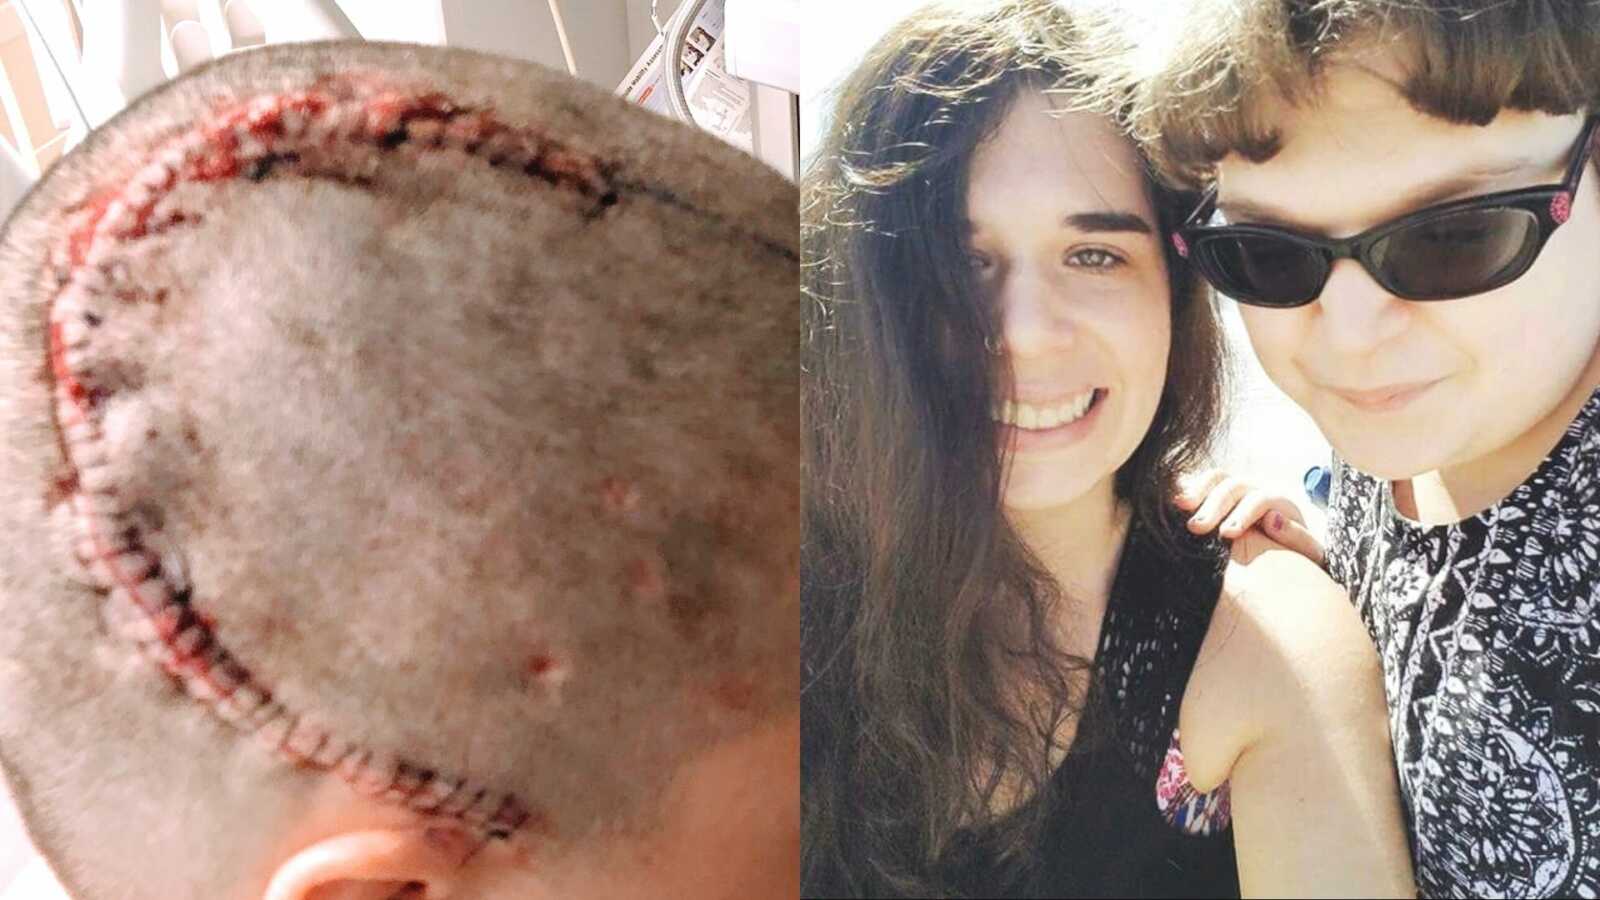 Shaved woman's head after brain surgery and woman with epilepsy with friend